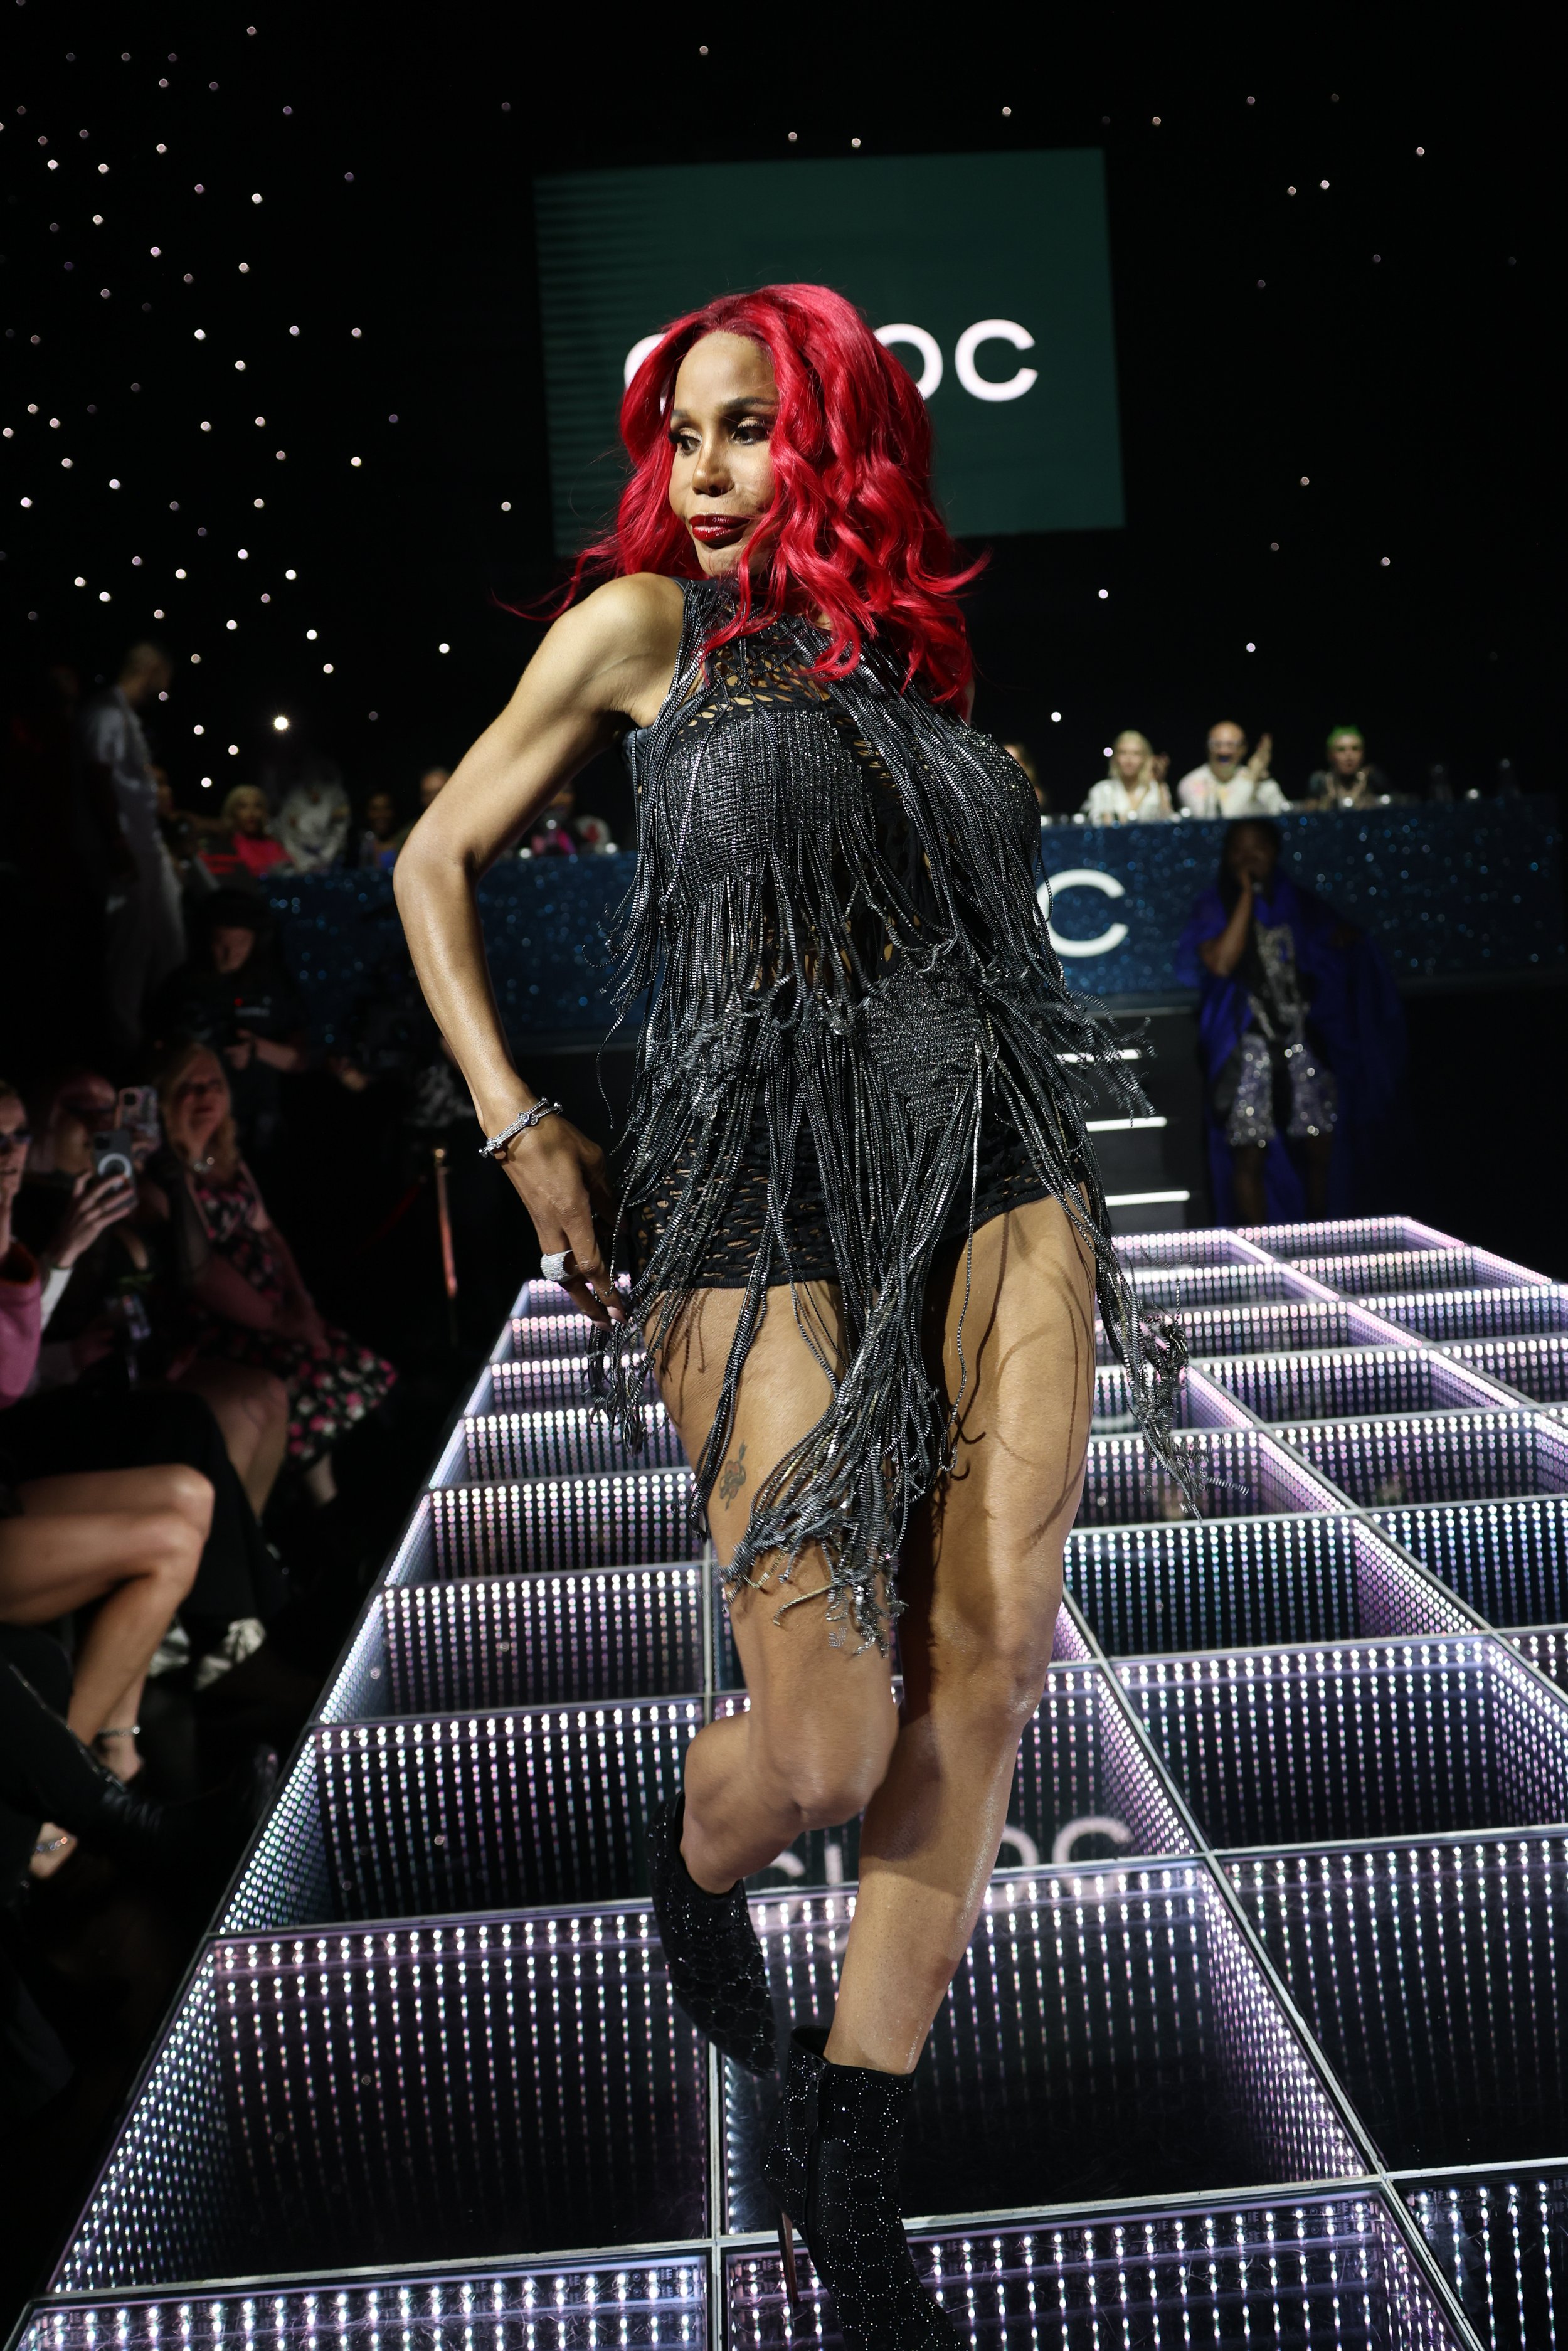  LONDON, ENGLAND - JUNE 30: Sinia Alaia attends the CÎROC Iconic Ball in support of Not A Phase at KOKO on June 30, 2022 in London, England. Today, the first ever CÎROC Iconic Ball brought the house down at legendary KOKO Camden in celebration of the